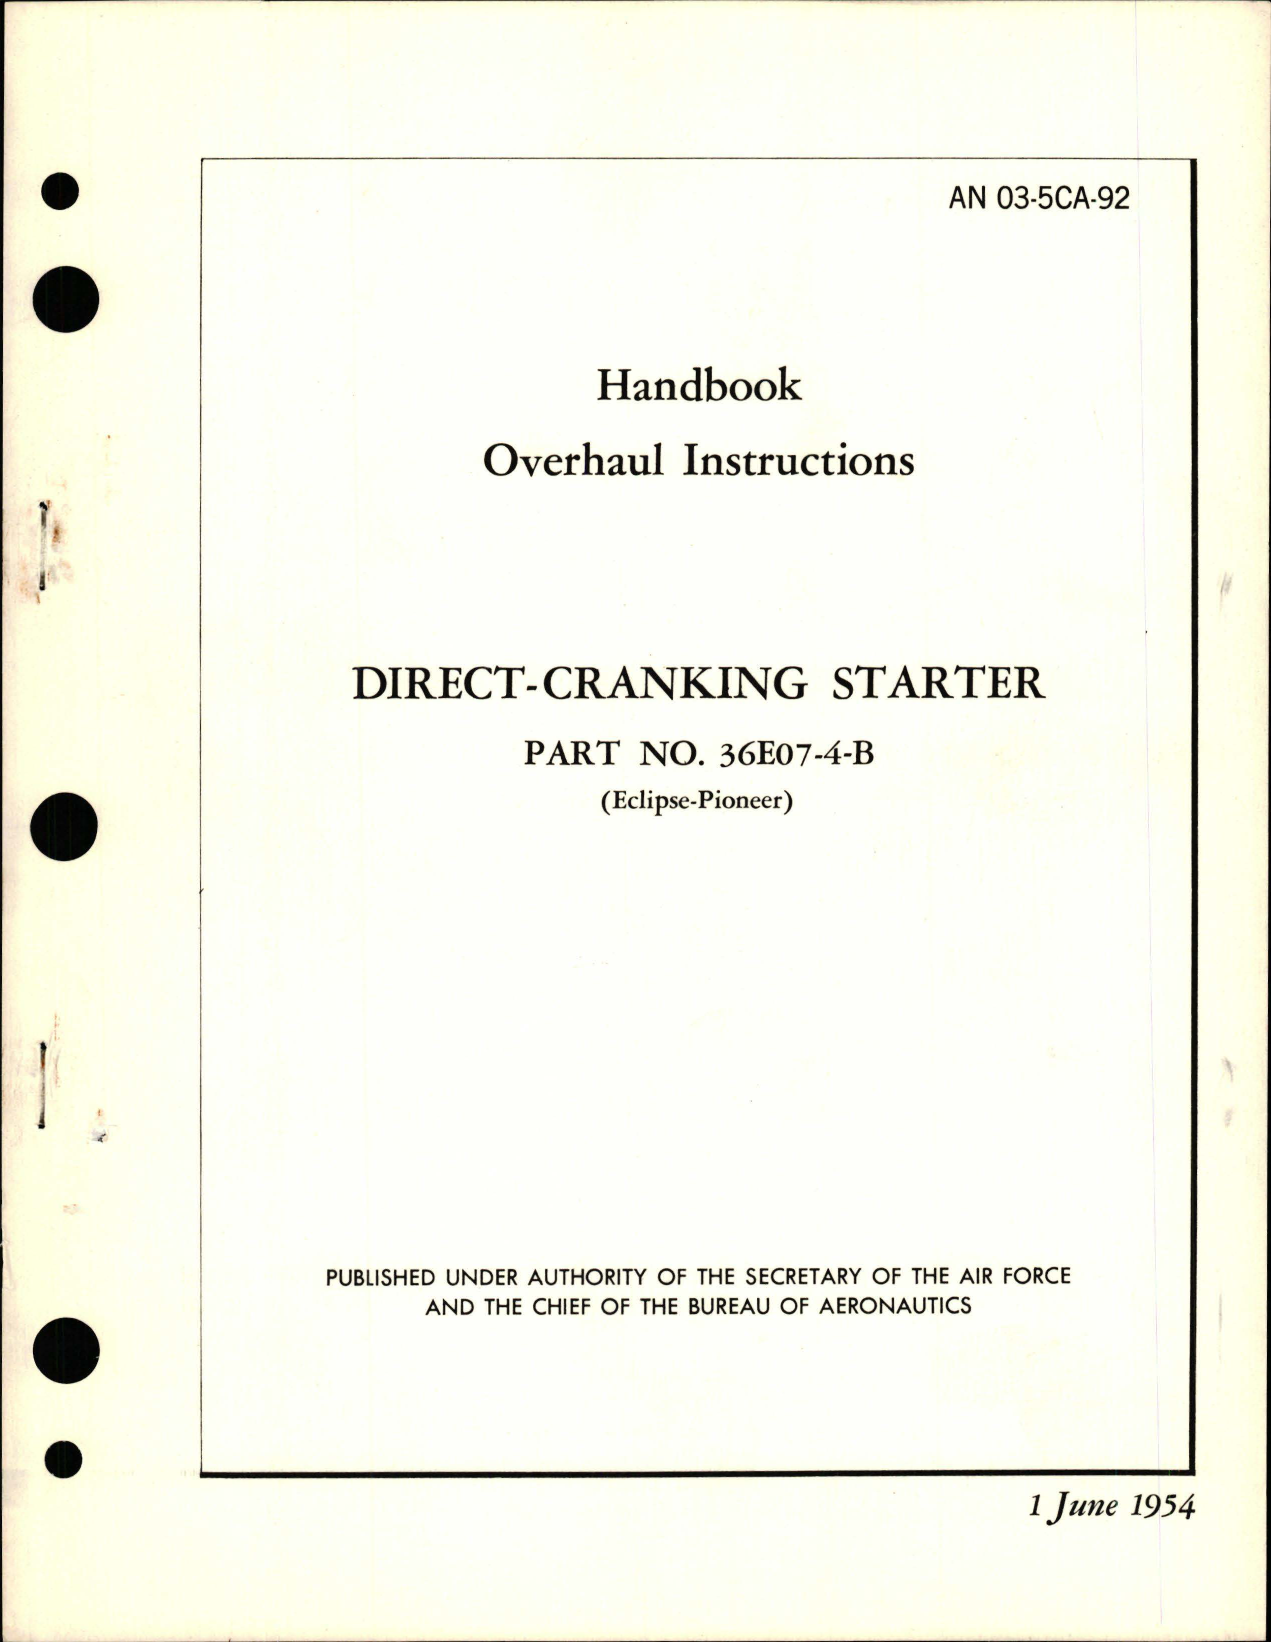 Sample page 1 from AirCorps Library document: Overhaul Instructions for Direct-Cranking Starter - Part 36E07-4-B